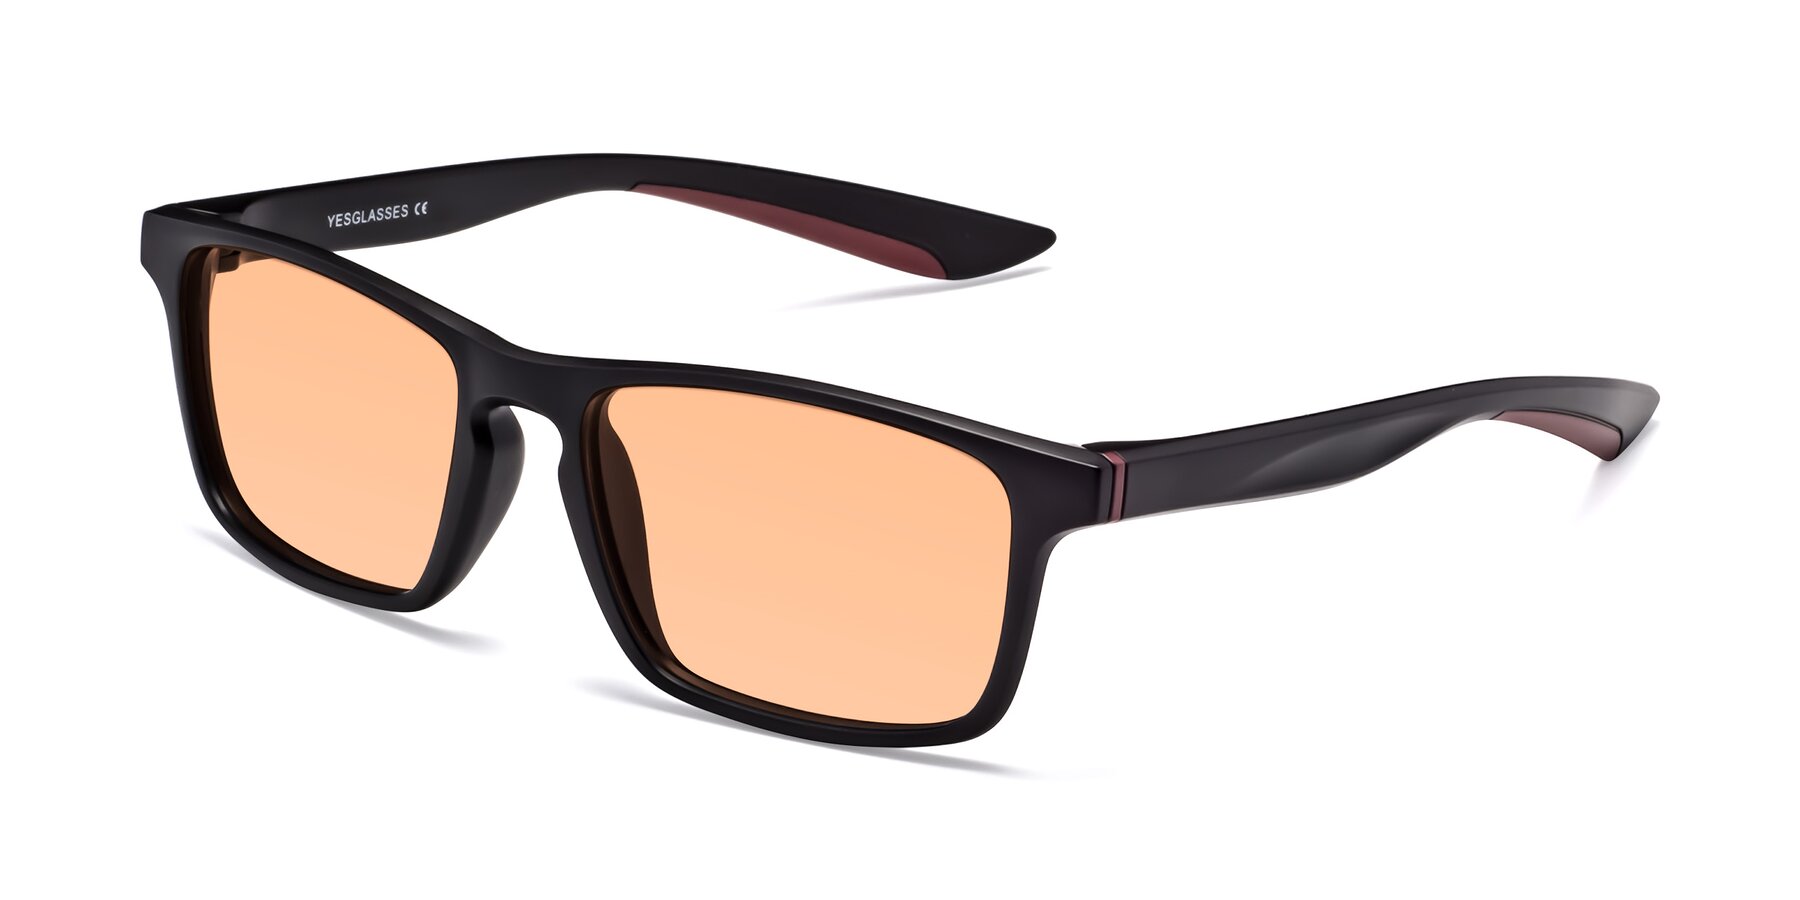 Angle of Passion in Matte Black-Wine with Light Orange Tinted Lenses